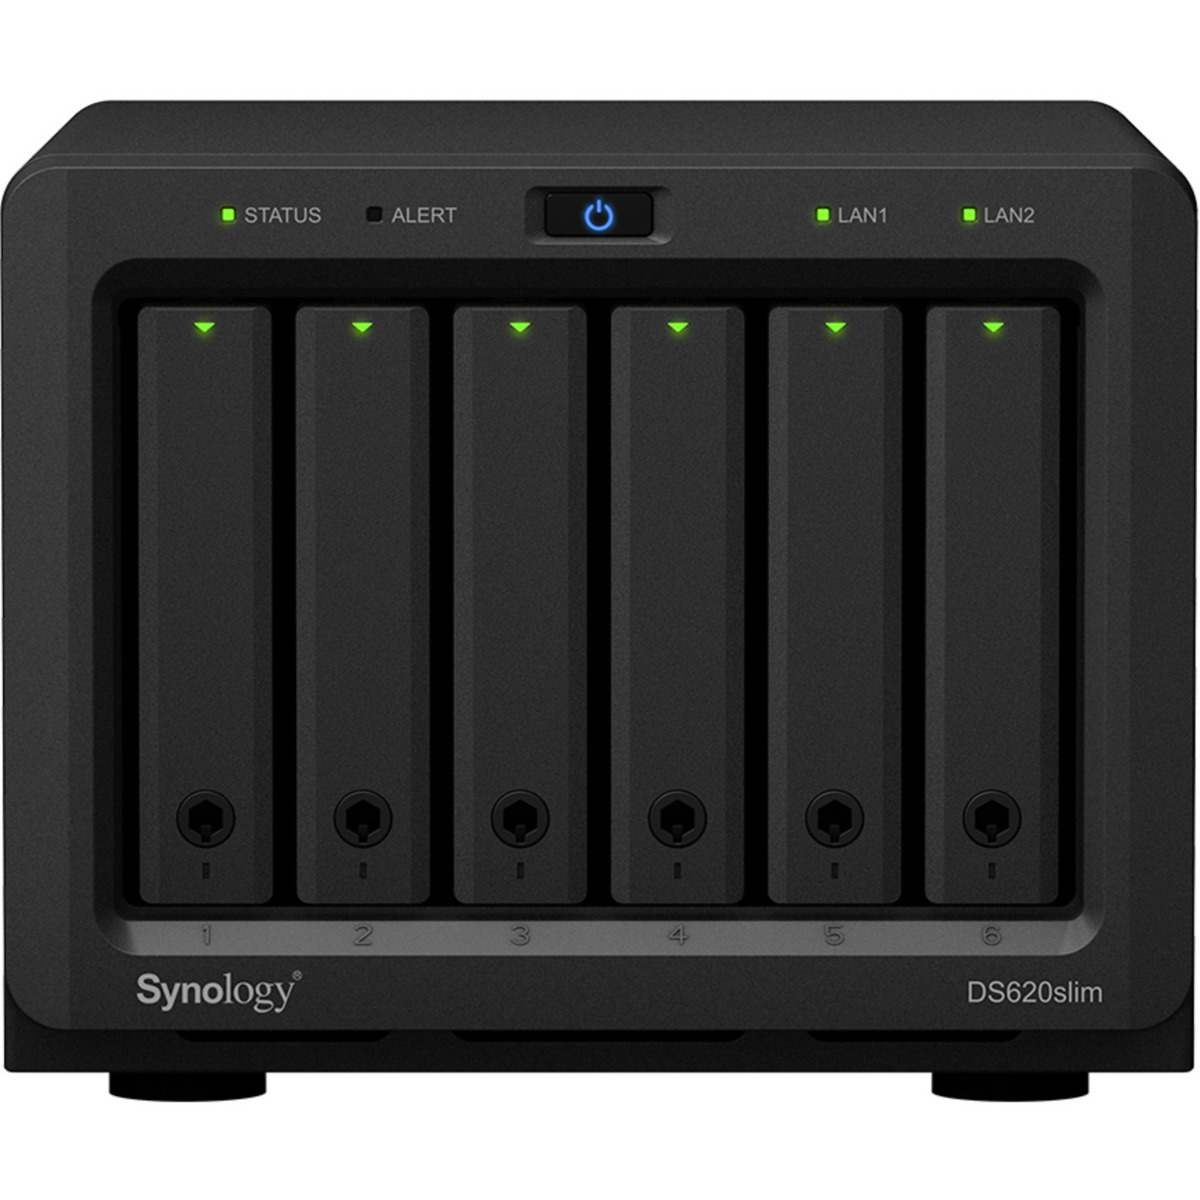 Synology DiskStation DS620slim 8tb 6-Bay Desktop Multimedia / Power User / Business NAS - Network Attached Storage Device 4x2tb Western Digital Red SA500 WDS200T1R0A 2.5 560/530MB/s SATA 6Gb/s SSD NAS Class Drives Installed - Burn-In Tested - FREE RAM UPGRADE DiskStation DS620slim